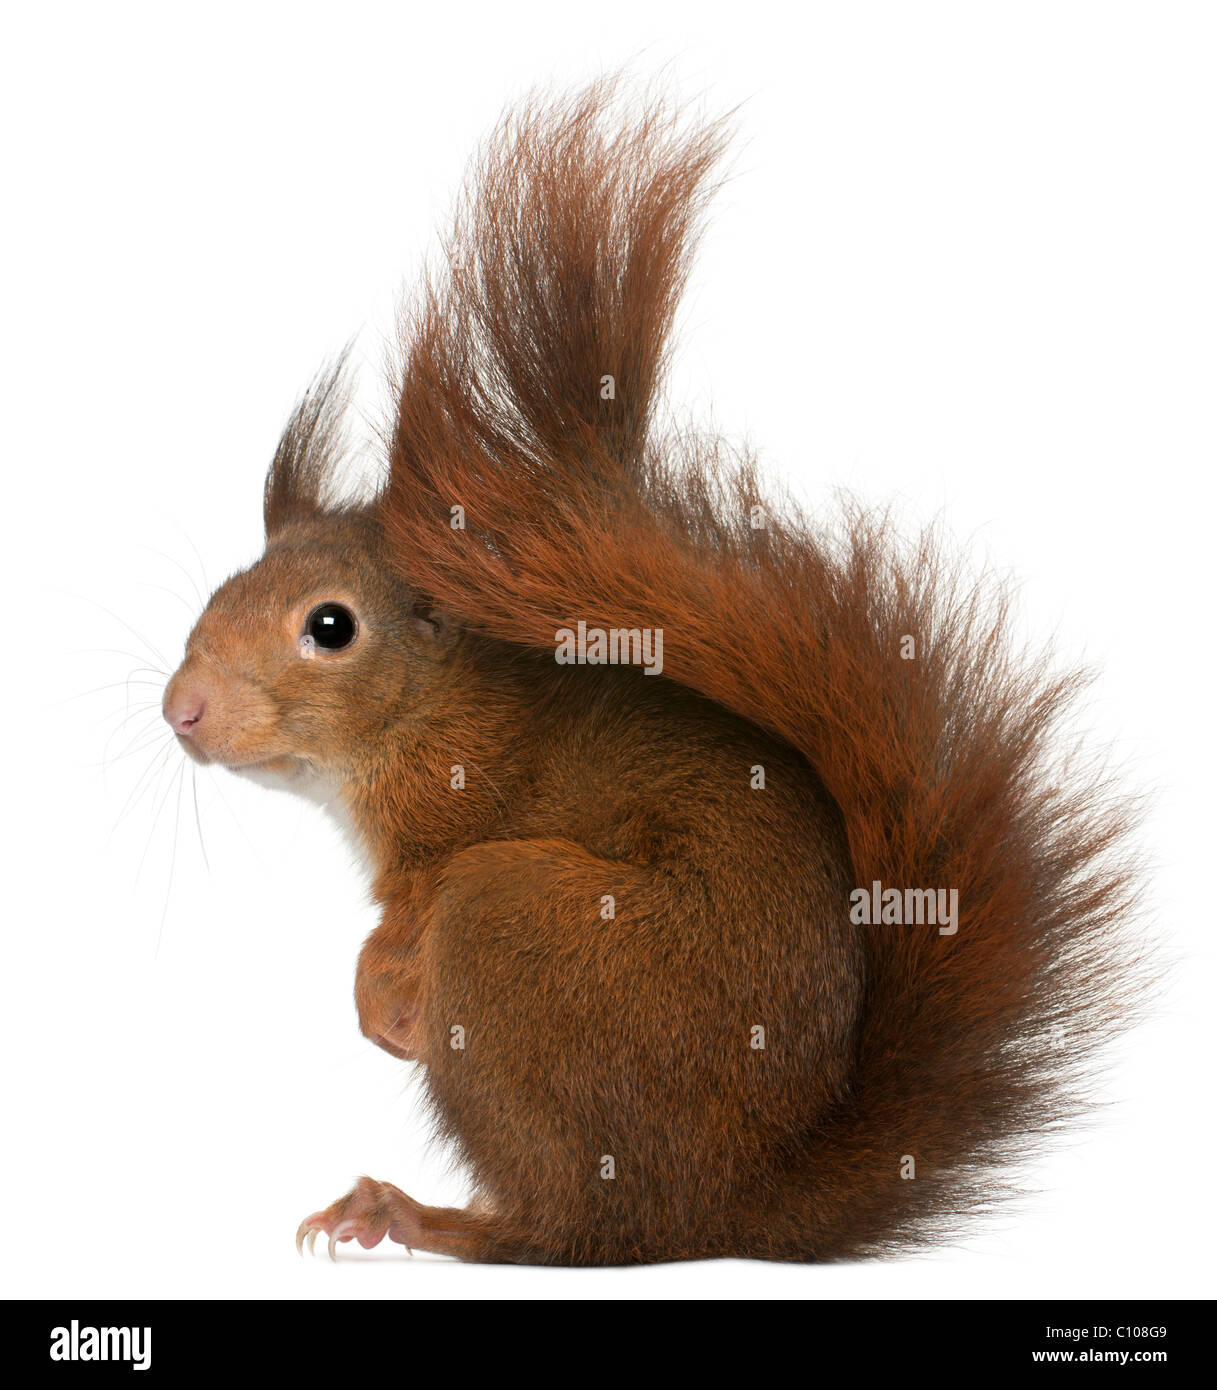 Eurasian red squirrel, Sciurus vulgaris, 4 years old, in front of white background Stock Photo